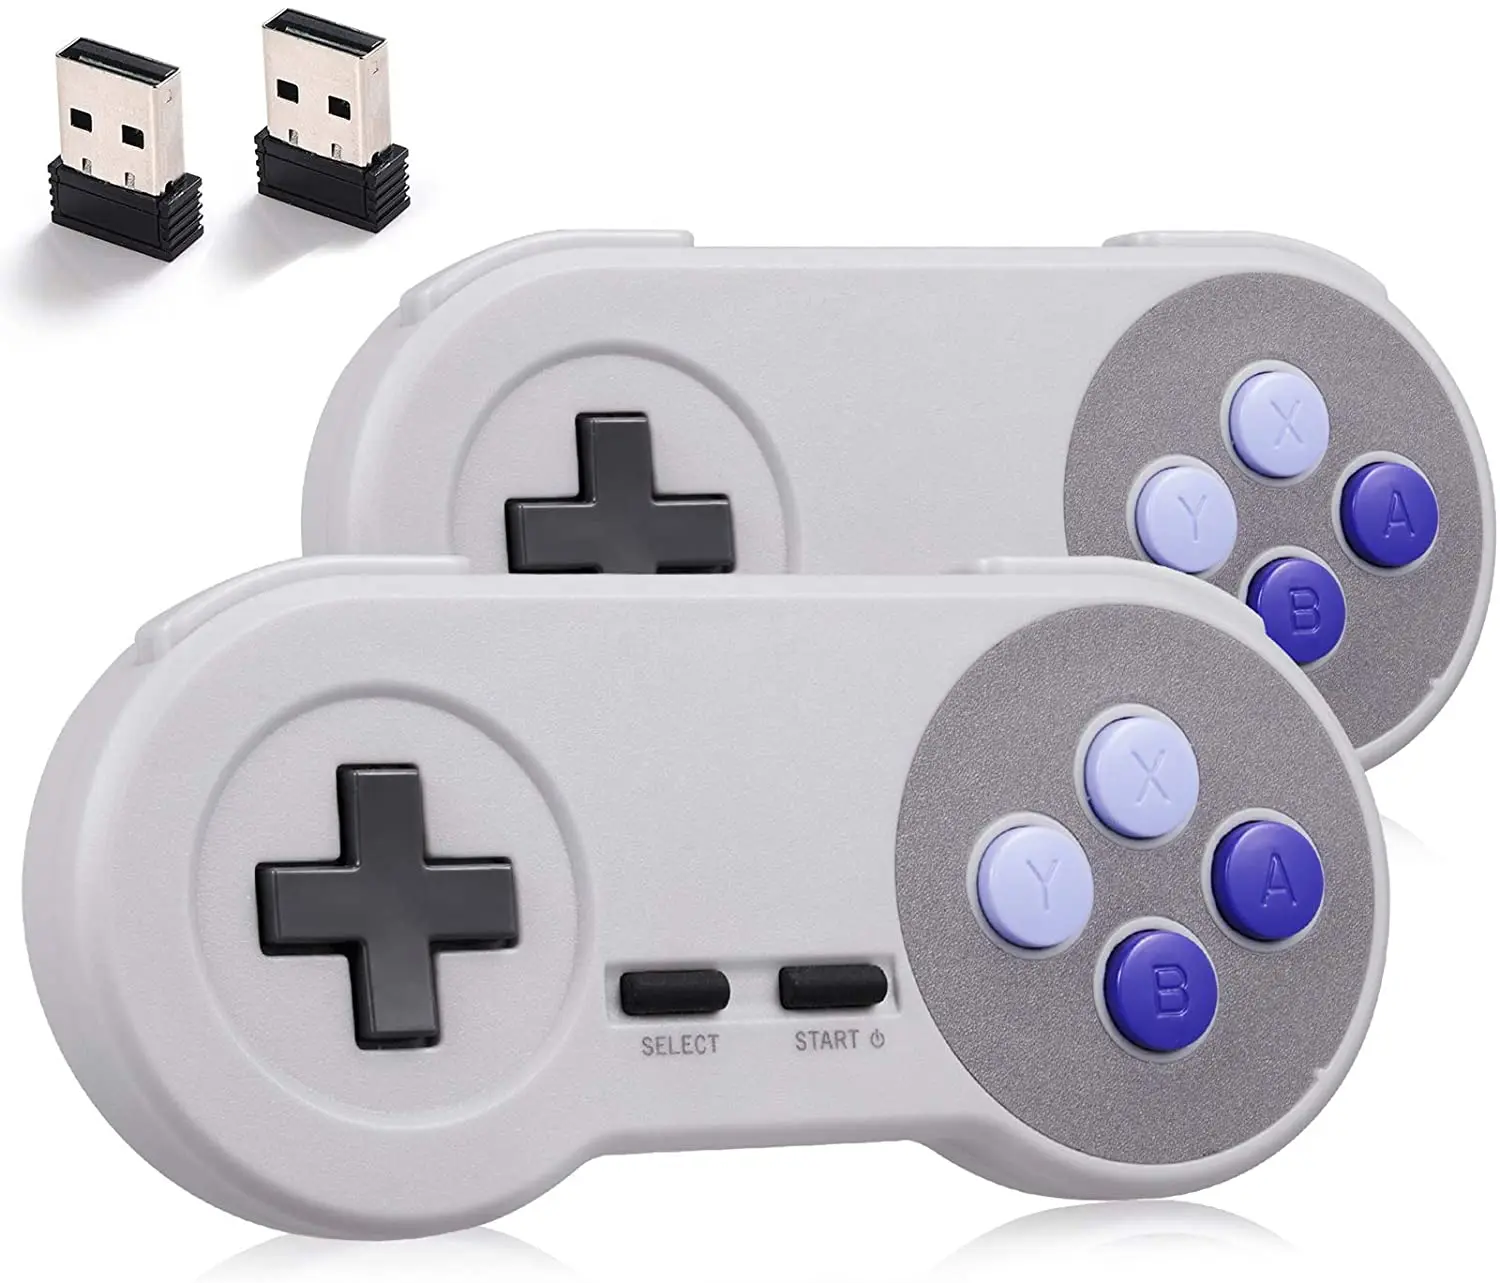 

2 Pack 2.4 GHz Wireless Retro USB Controller Compatible with SNES Games, for Windows PC MAC Linux Genesis Raspberry Pi Retropie